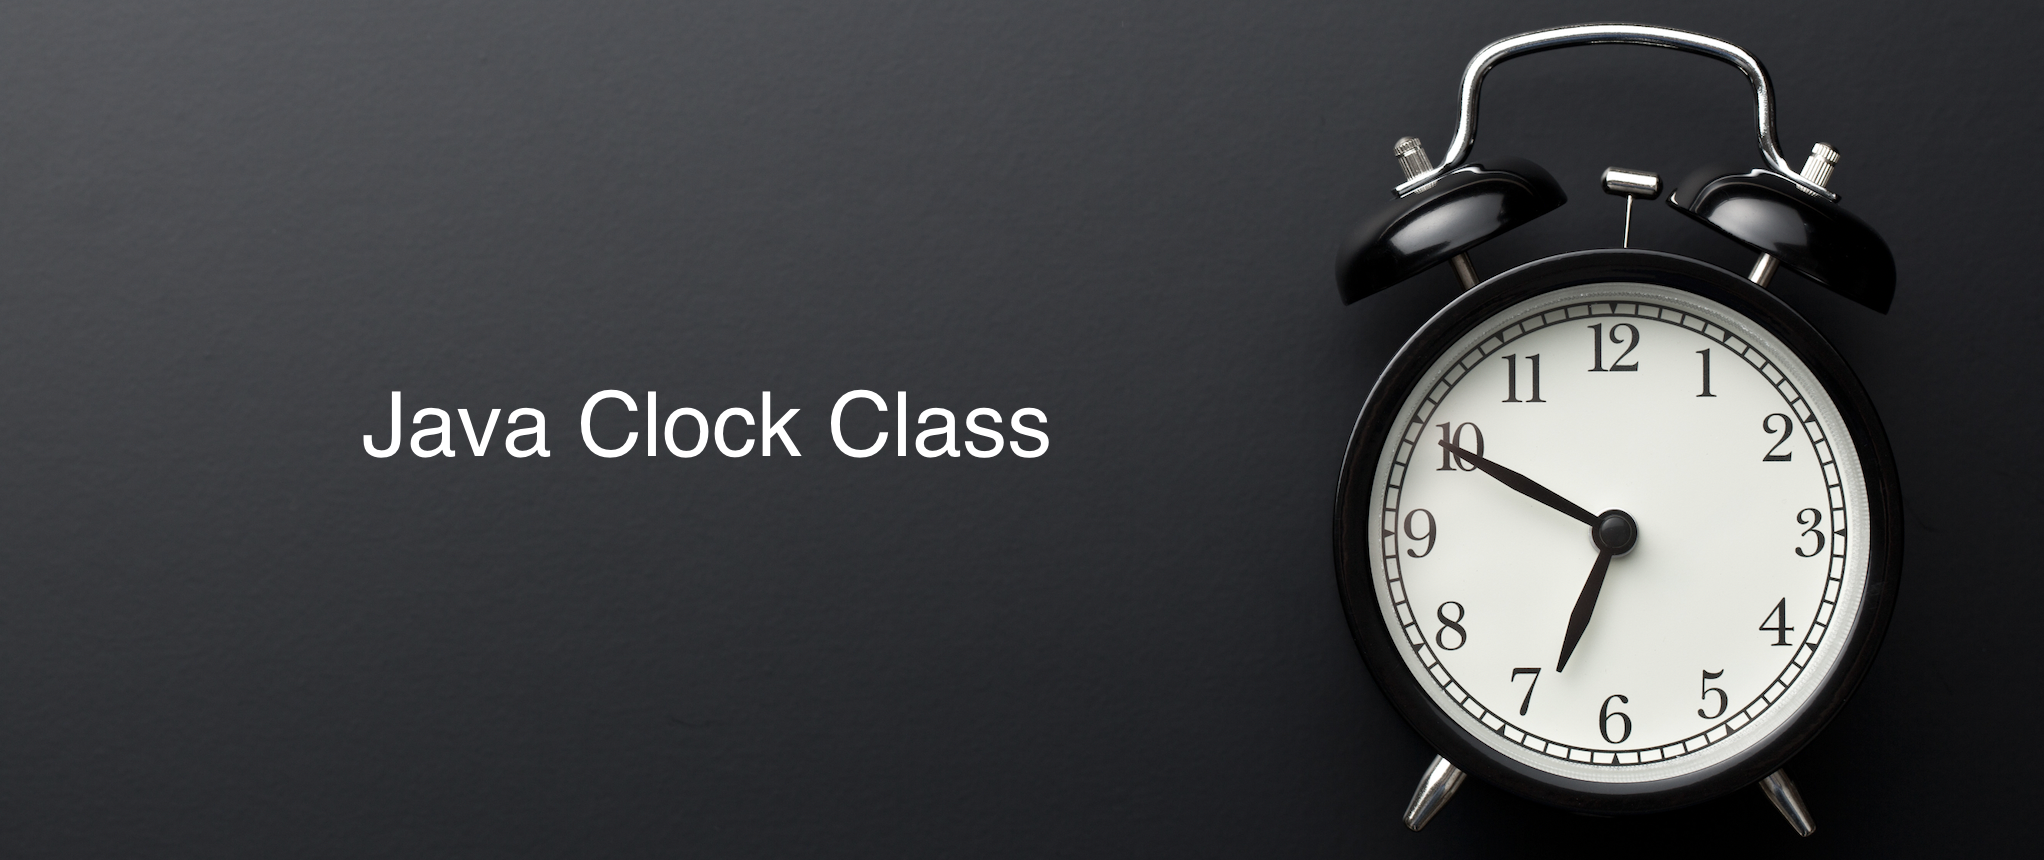 Java Clock Class from Date Time API